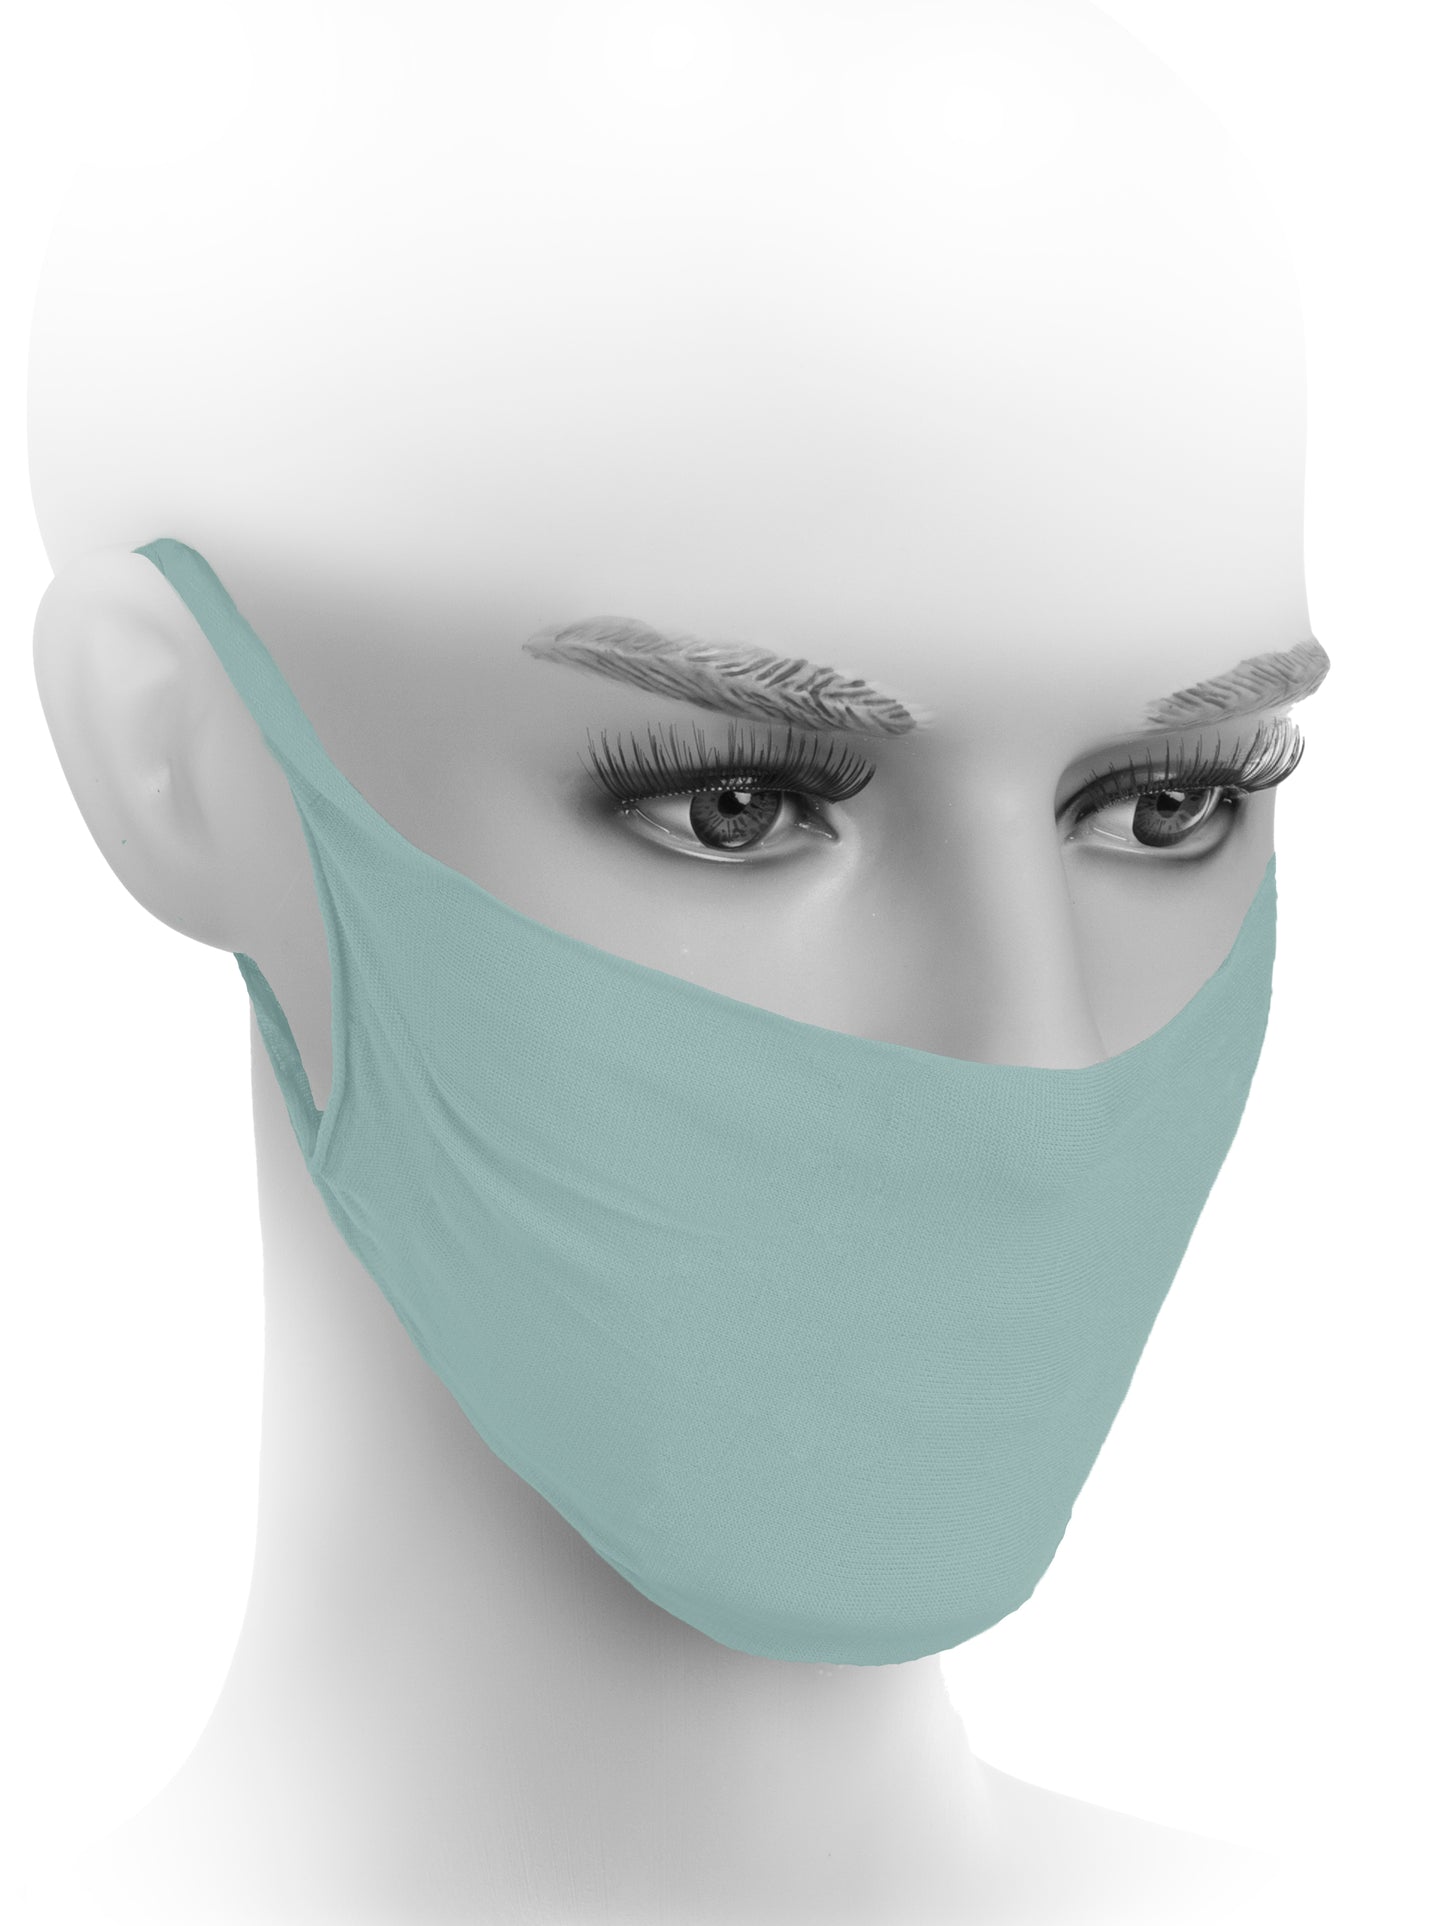 Fiore Hygiene Face Mask M0001 - face covering in mint green